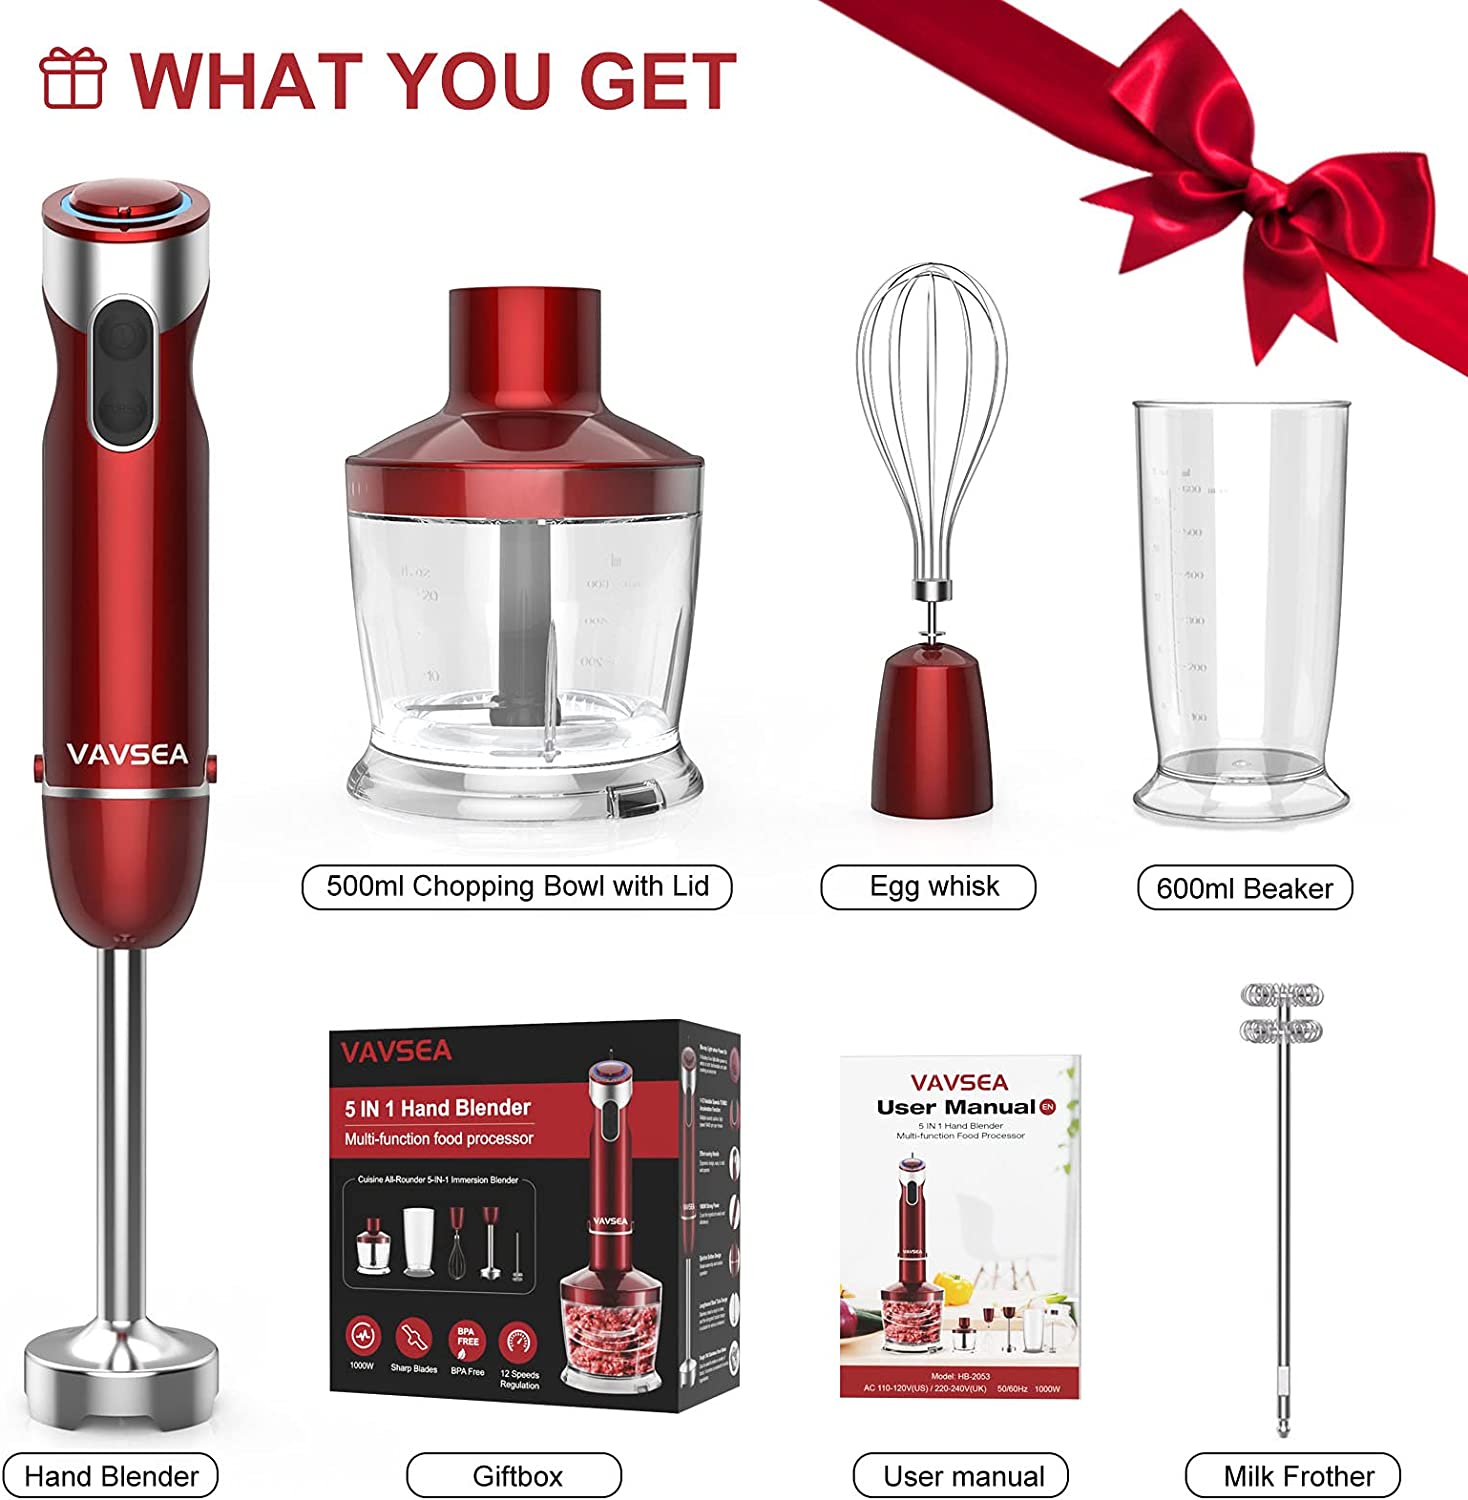 VAVSEA 1000W 5-in-1 Immersion hand Blender, (Red, Stainless Steel) - BB:USA